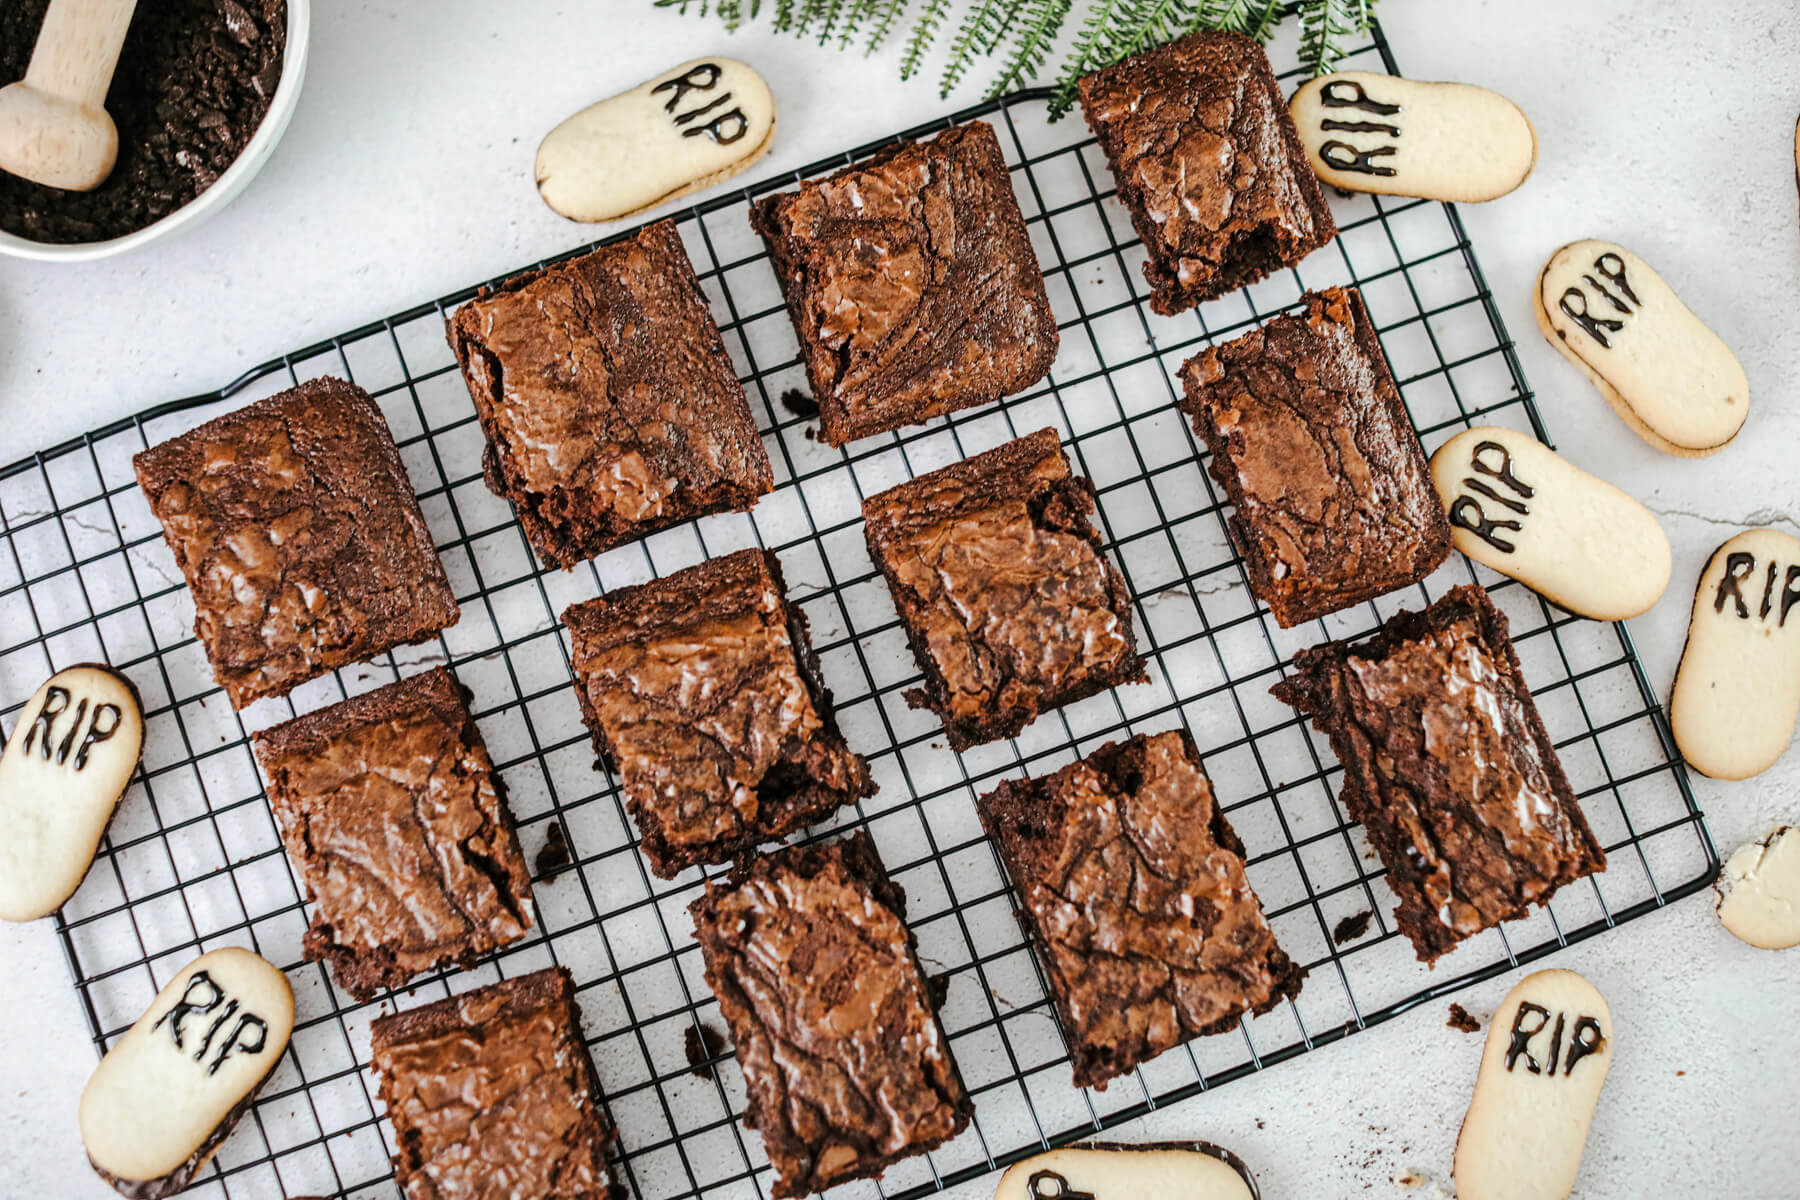 Twelve baked brownies on a wire cooling rack.